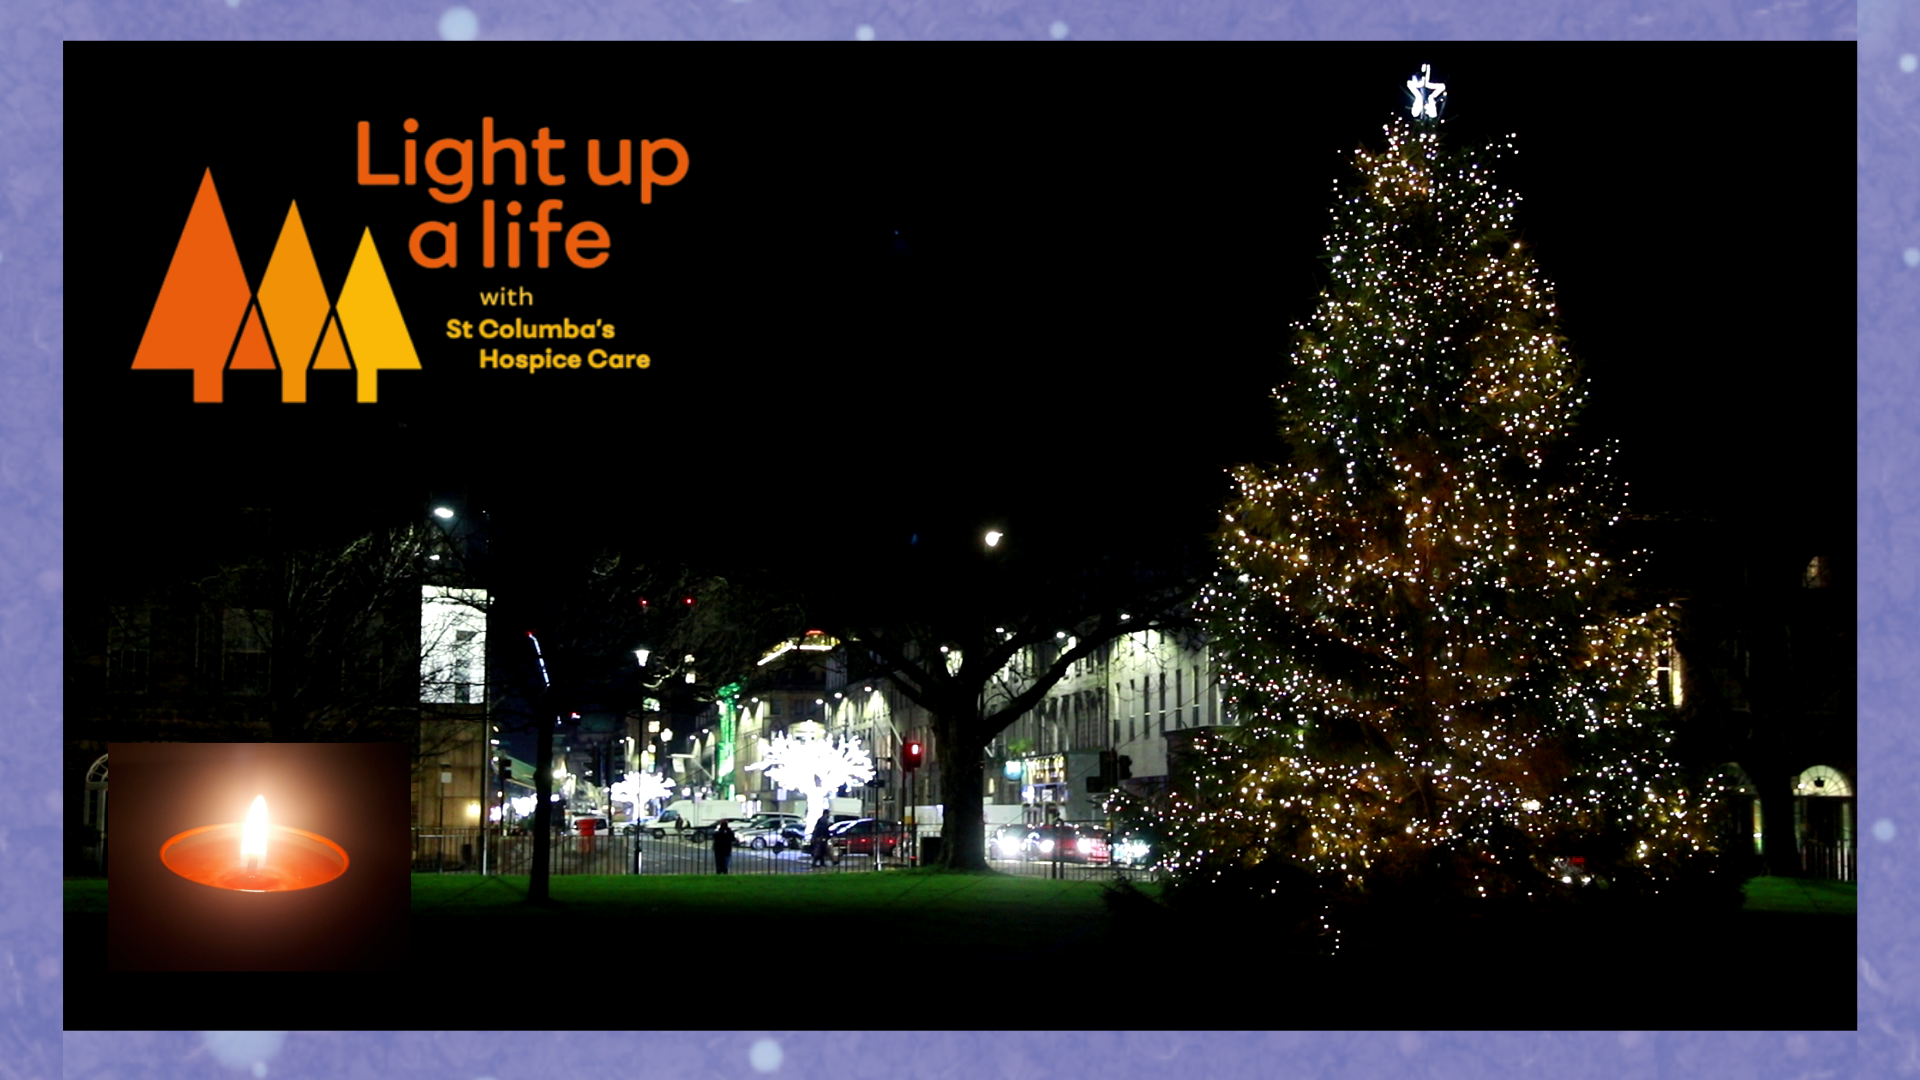 Light Up A Life 2020 Online Christmas Service image